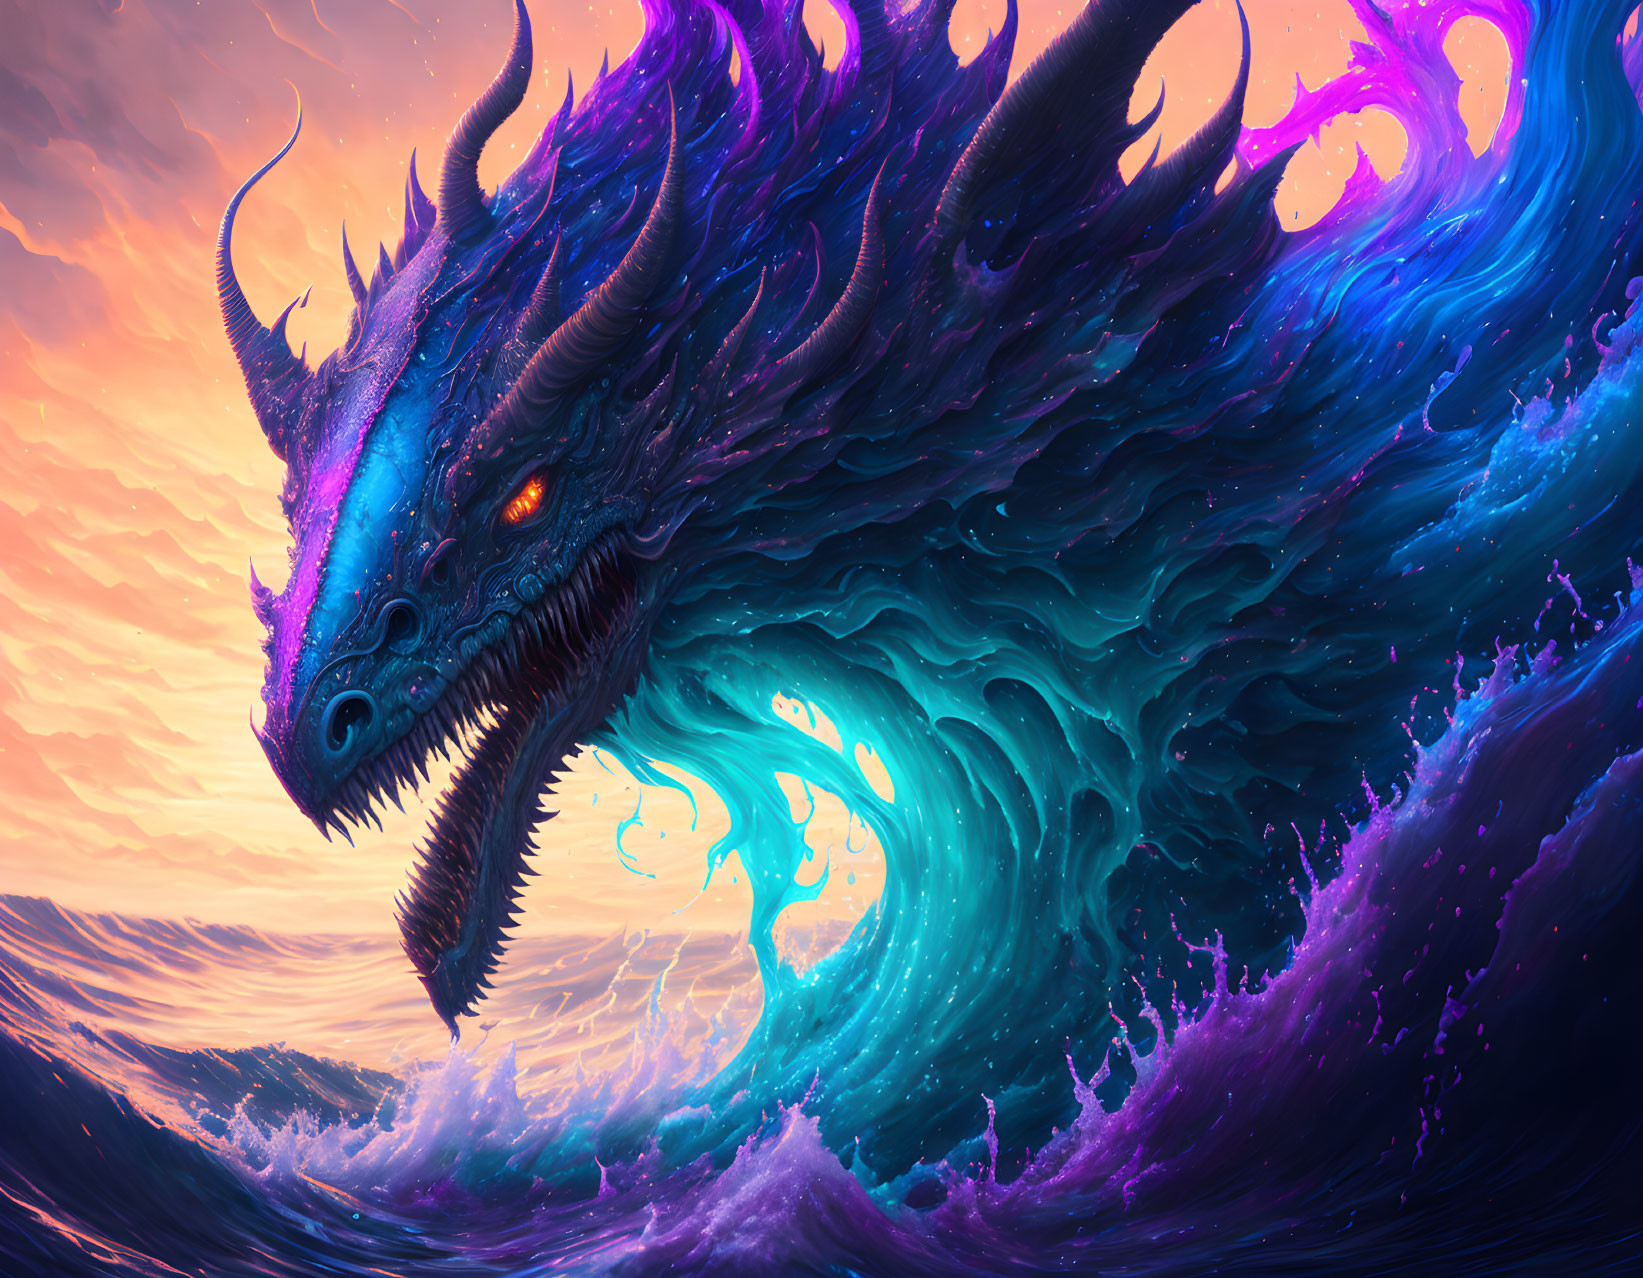 Majestic dragon with neon highlights emerges from ocean at sunset